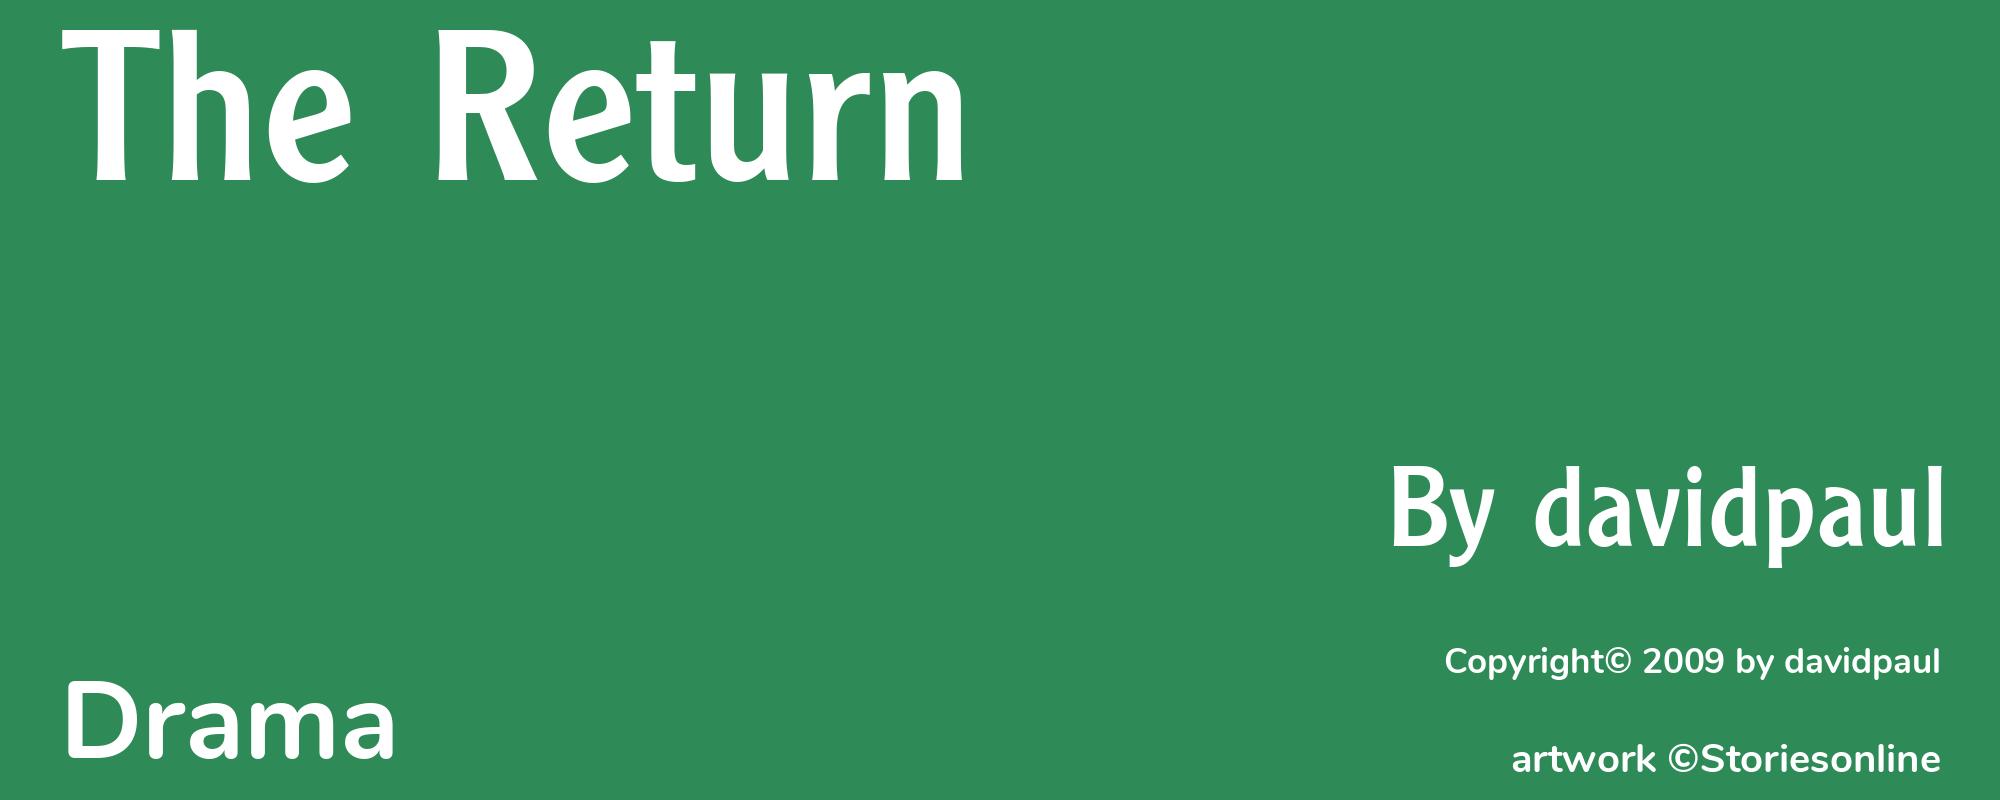 The Return - Cover